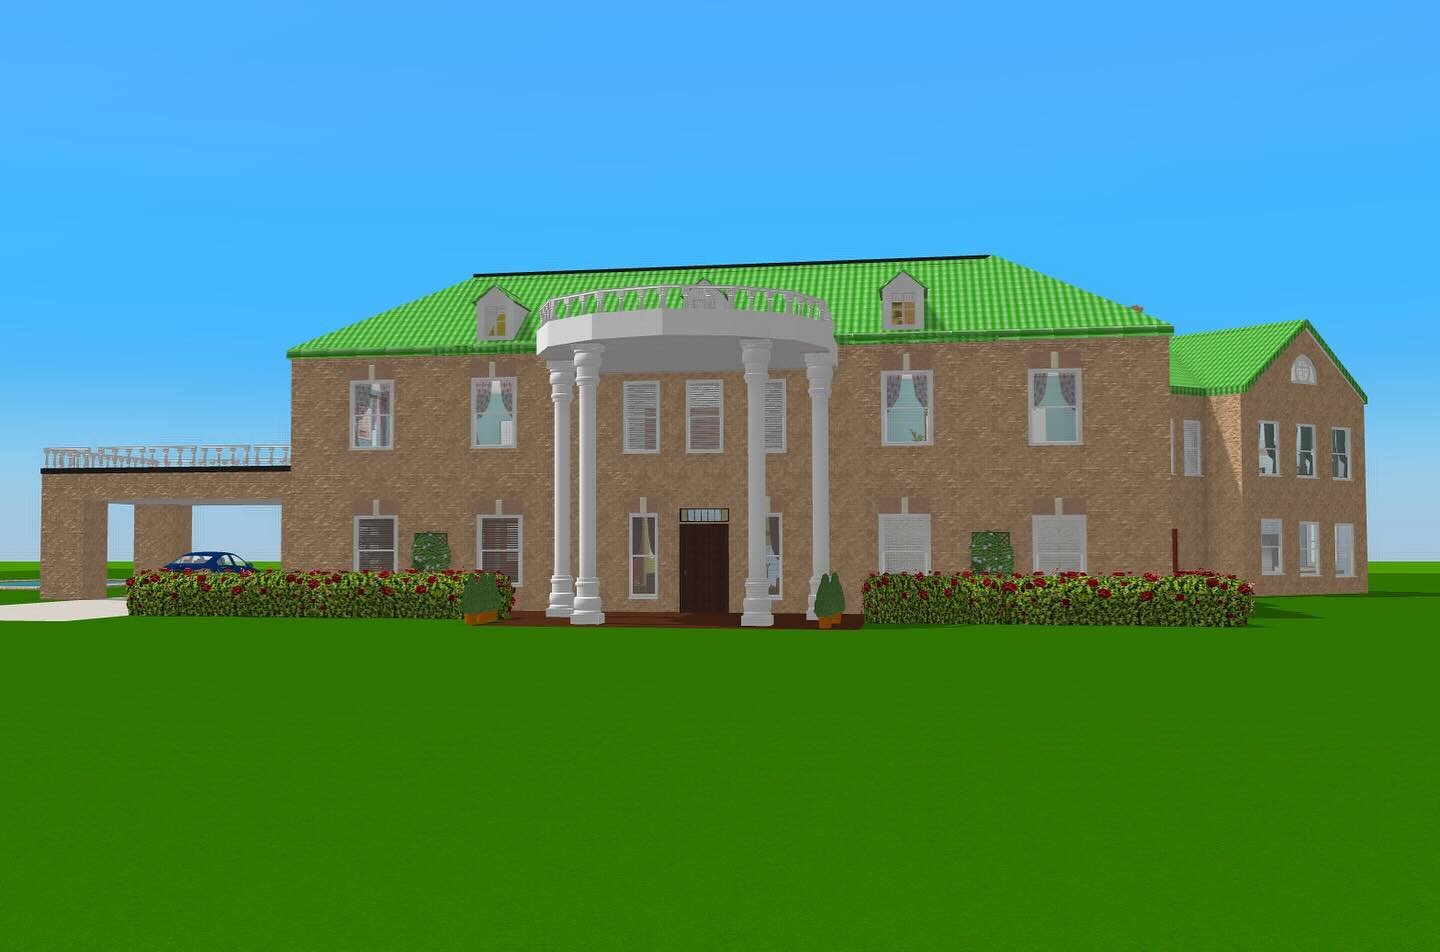 Since I started this project I&rsquo;ve been curious to know what Briarcliff would have looked like in its original form. Using an app that&rsquo;s&hellip;.. I mean it&rsquo;s like one step above Minecraft&hellip; I managed to turn a combination of a